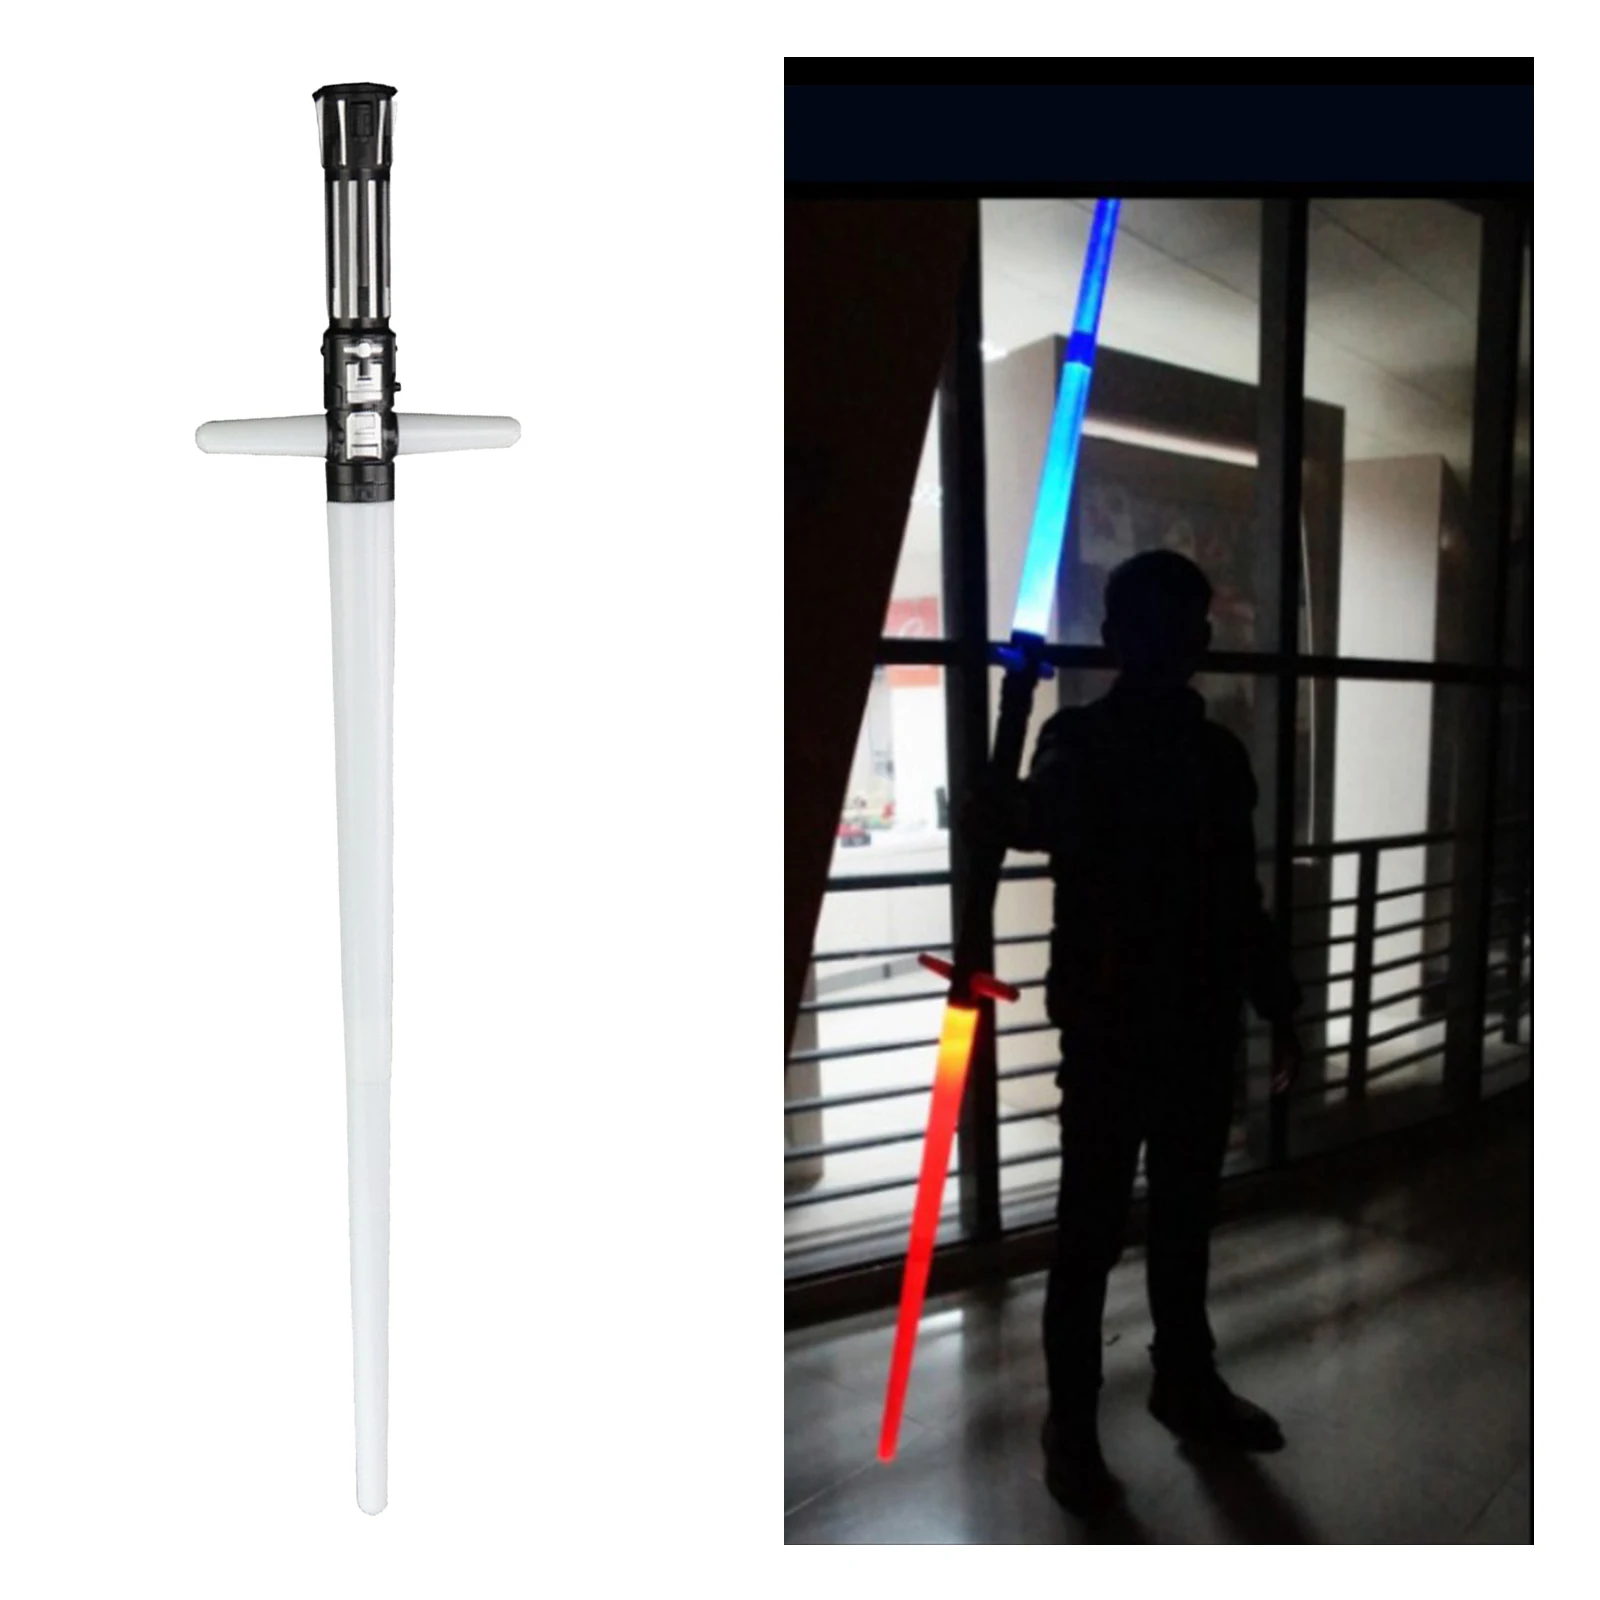 2-in-1 Flashing Lightsaber Light Up  Roleplay Costume  Presents